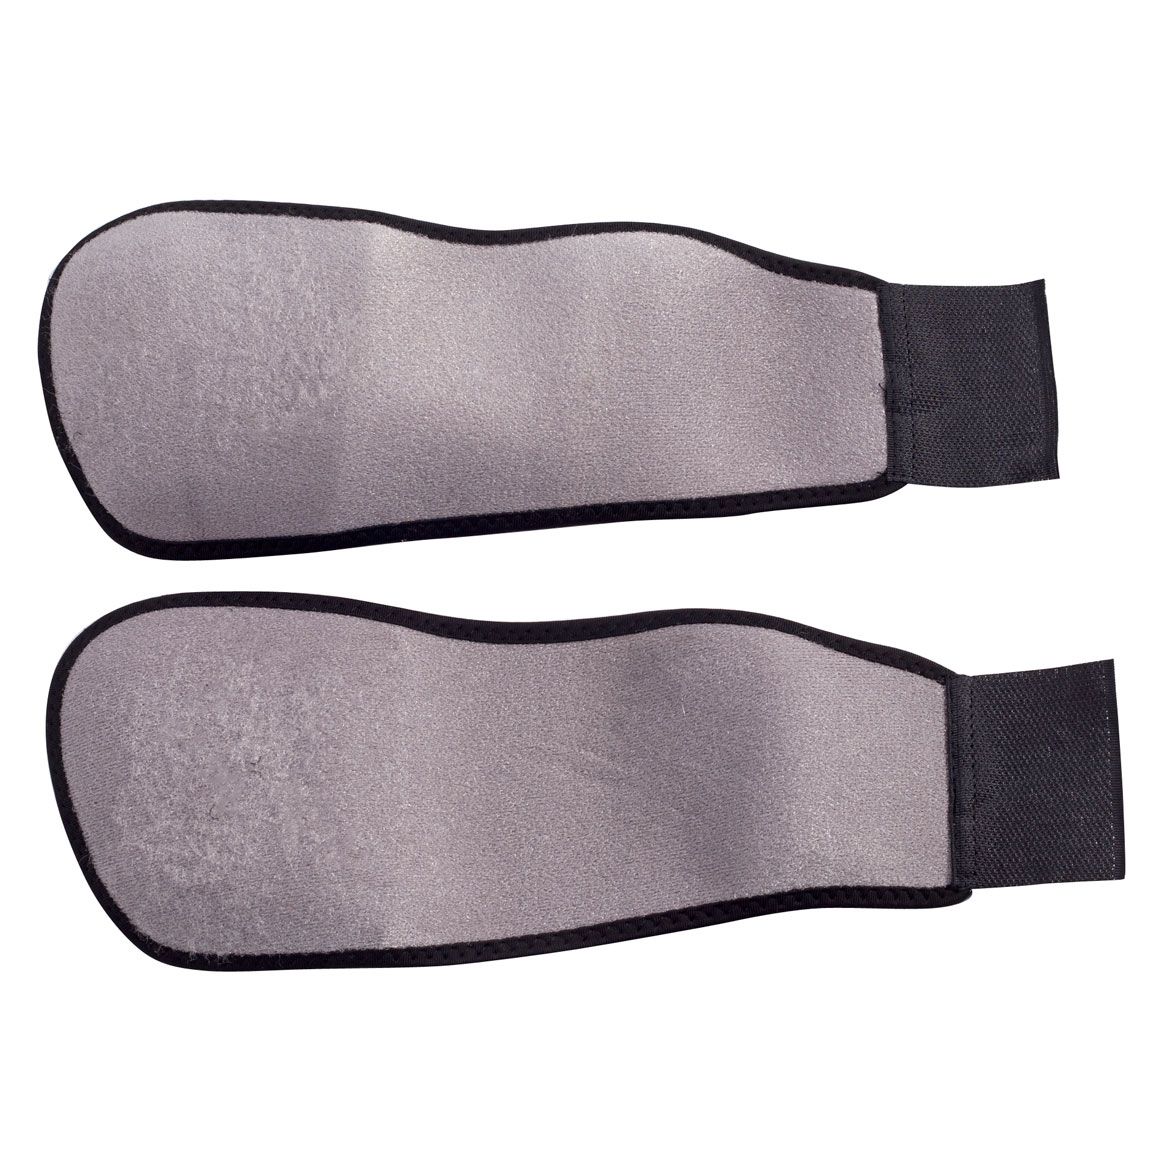 Adjustable Compression Arch Support, 1 Pair + '-' + 359503